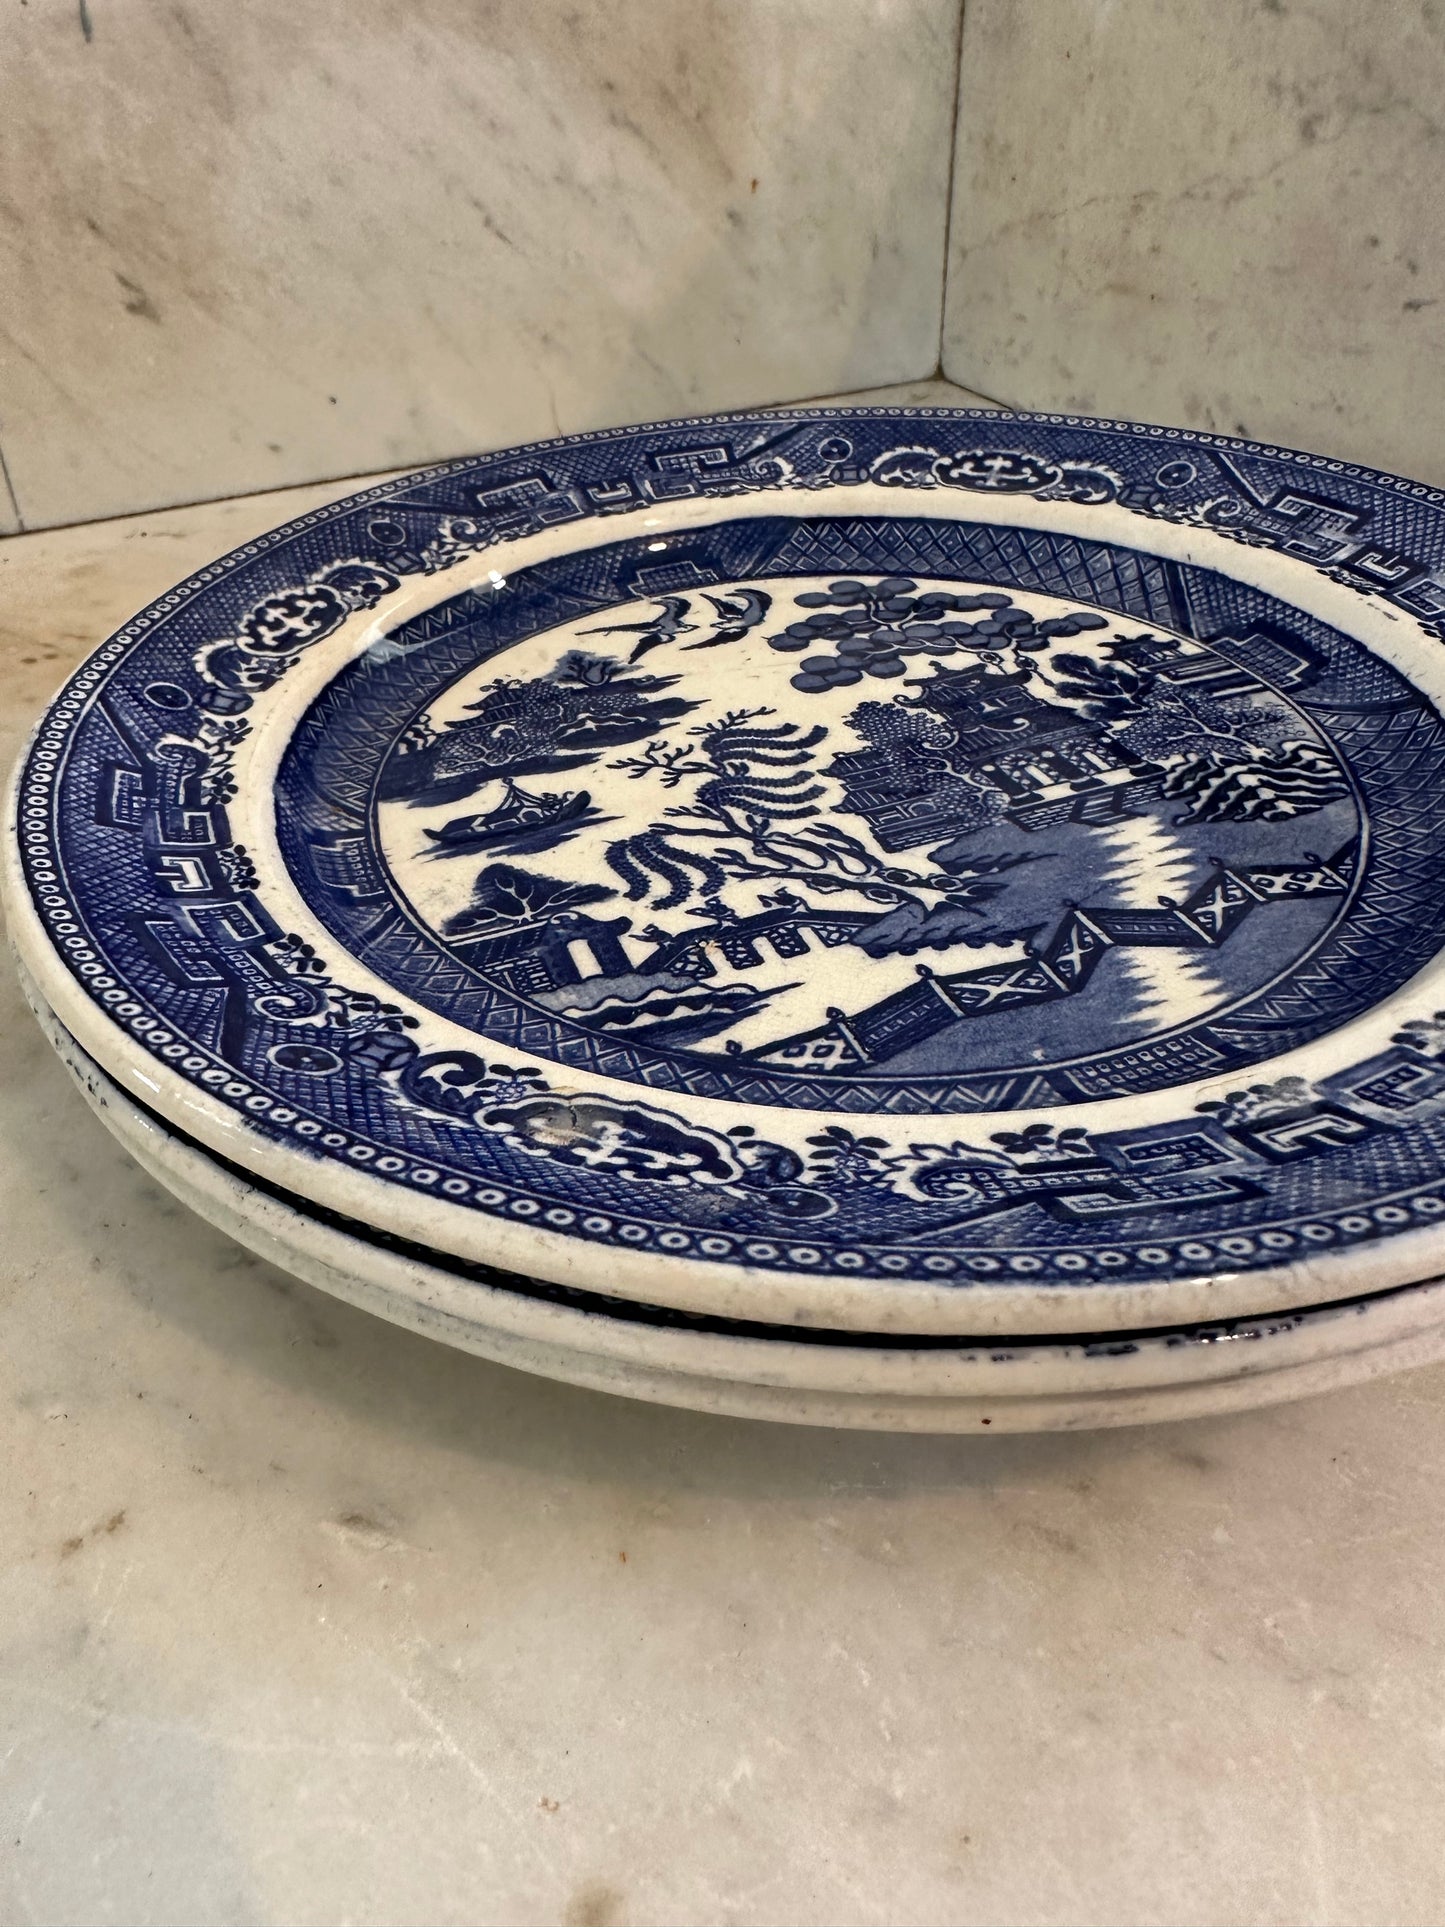 Blue Willow Ironstone Plate Sold Individually - Crown Pottery